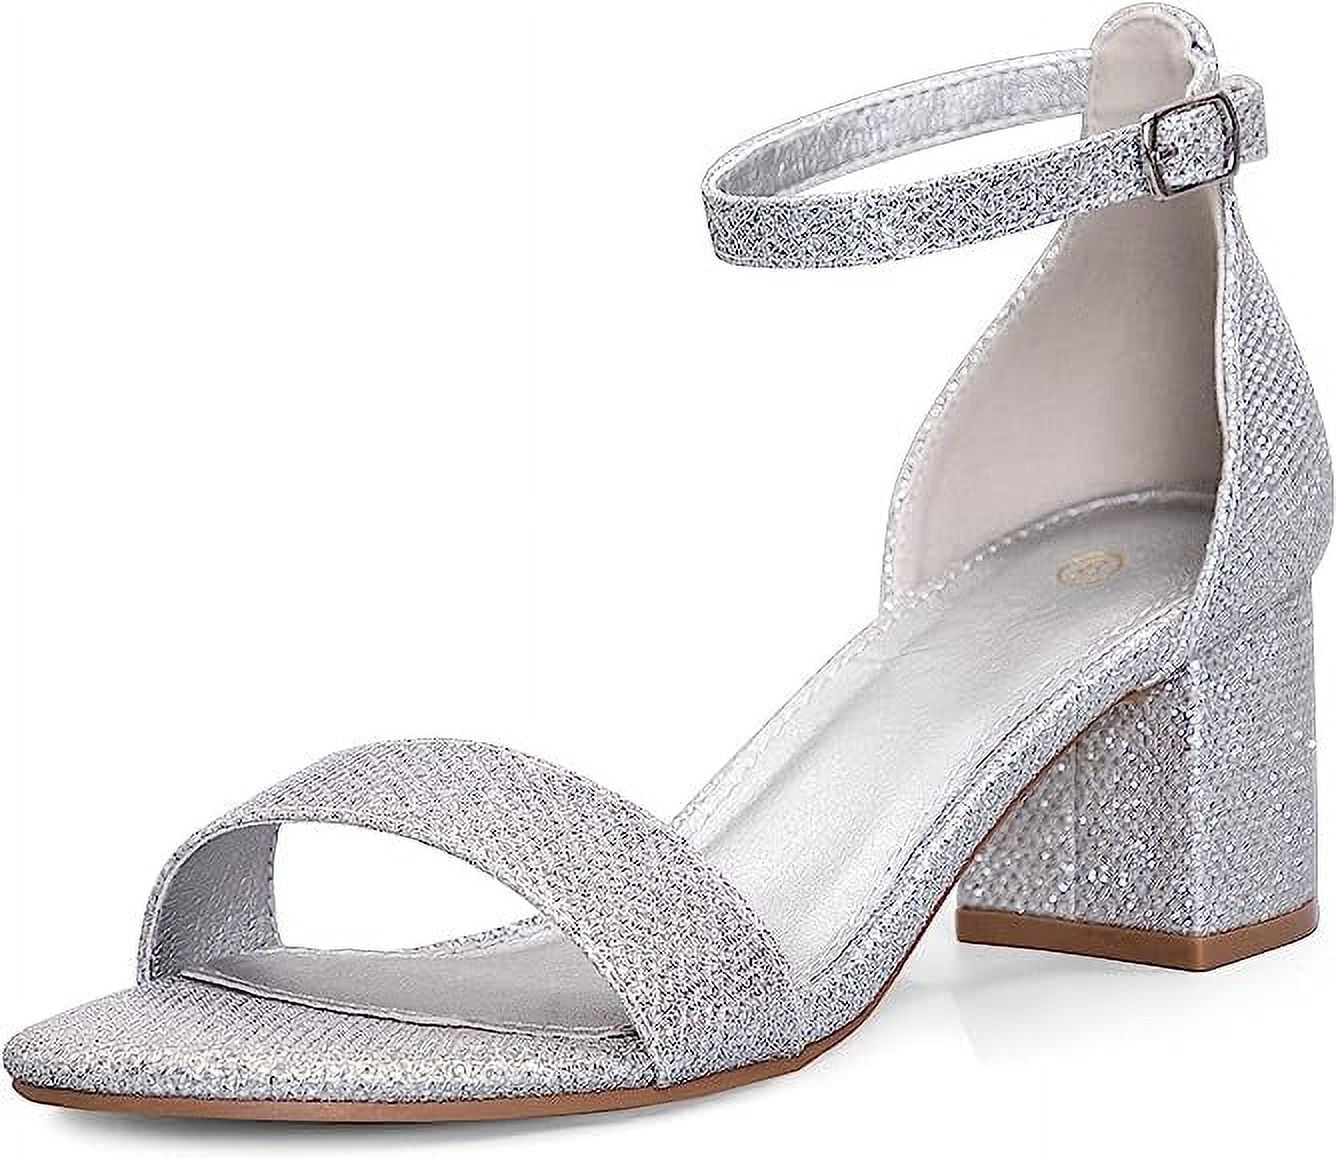 Pennysue Women's Chunky Low Heels Sandals Silver Glitter Ankle Strap ...